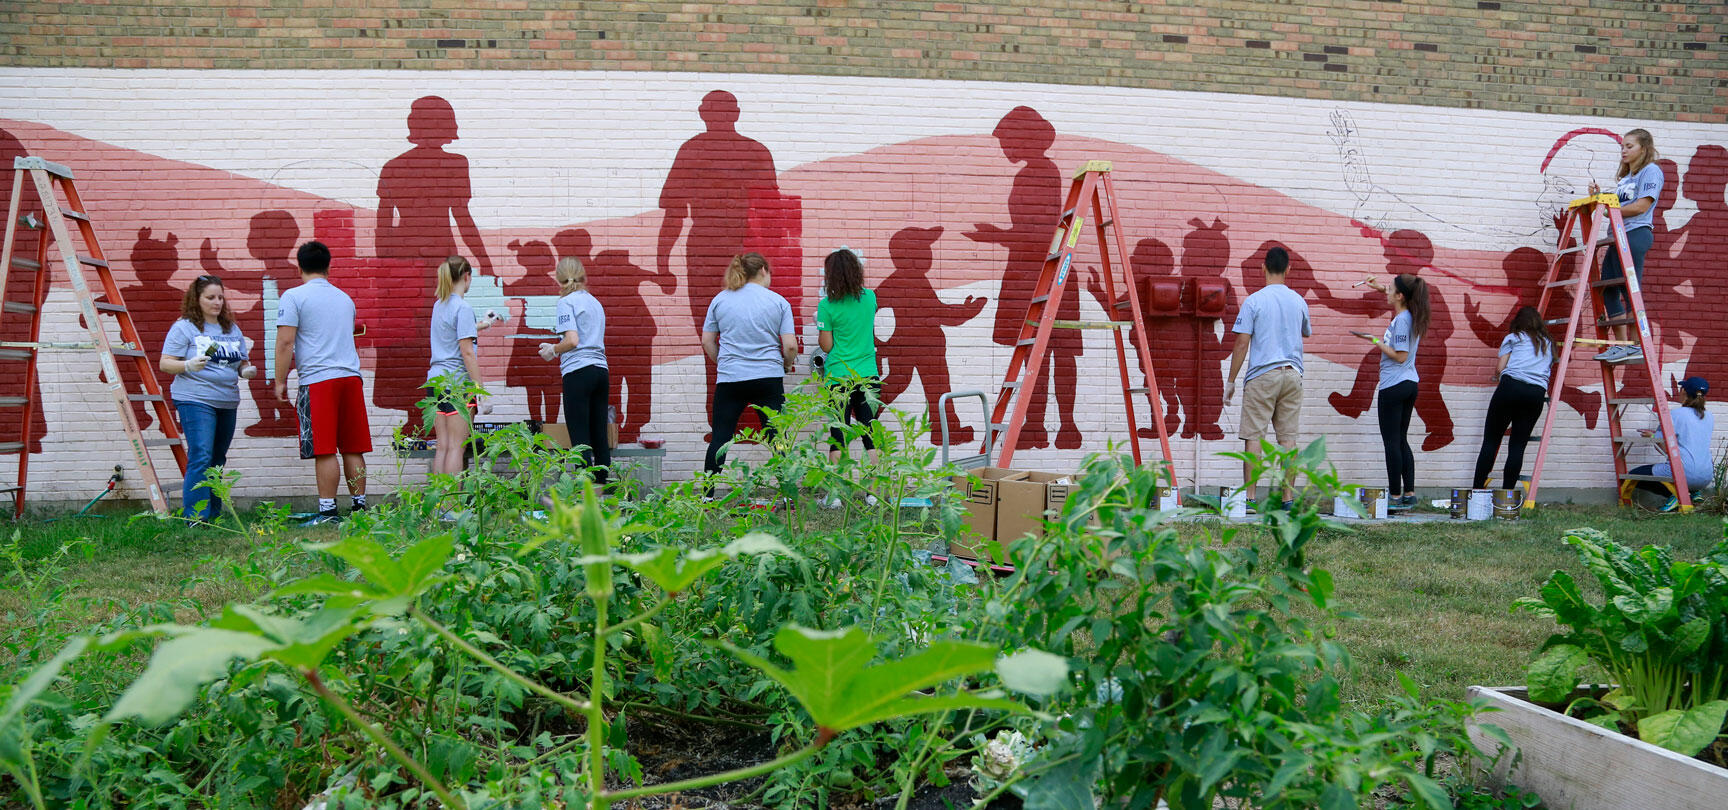 Students paint mural on wall in garden